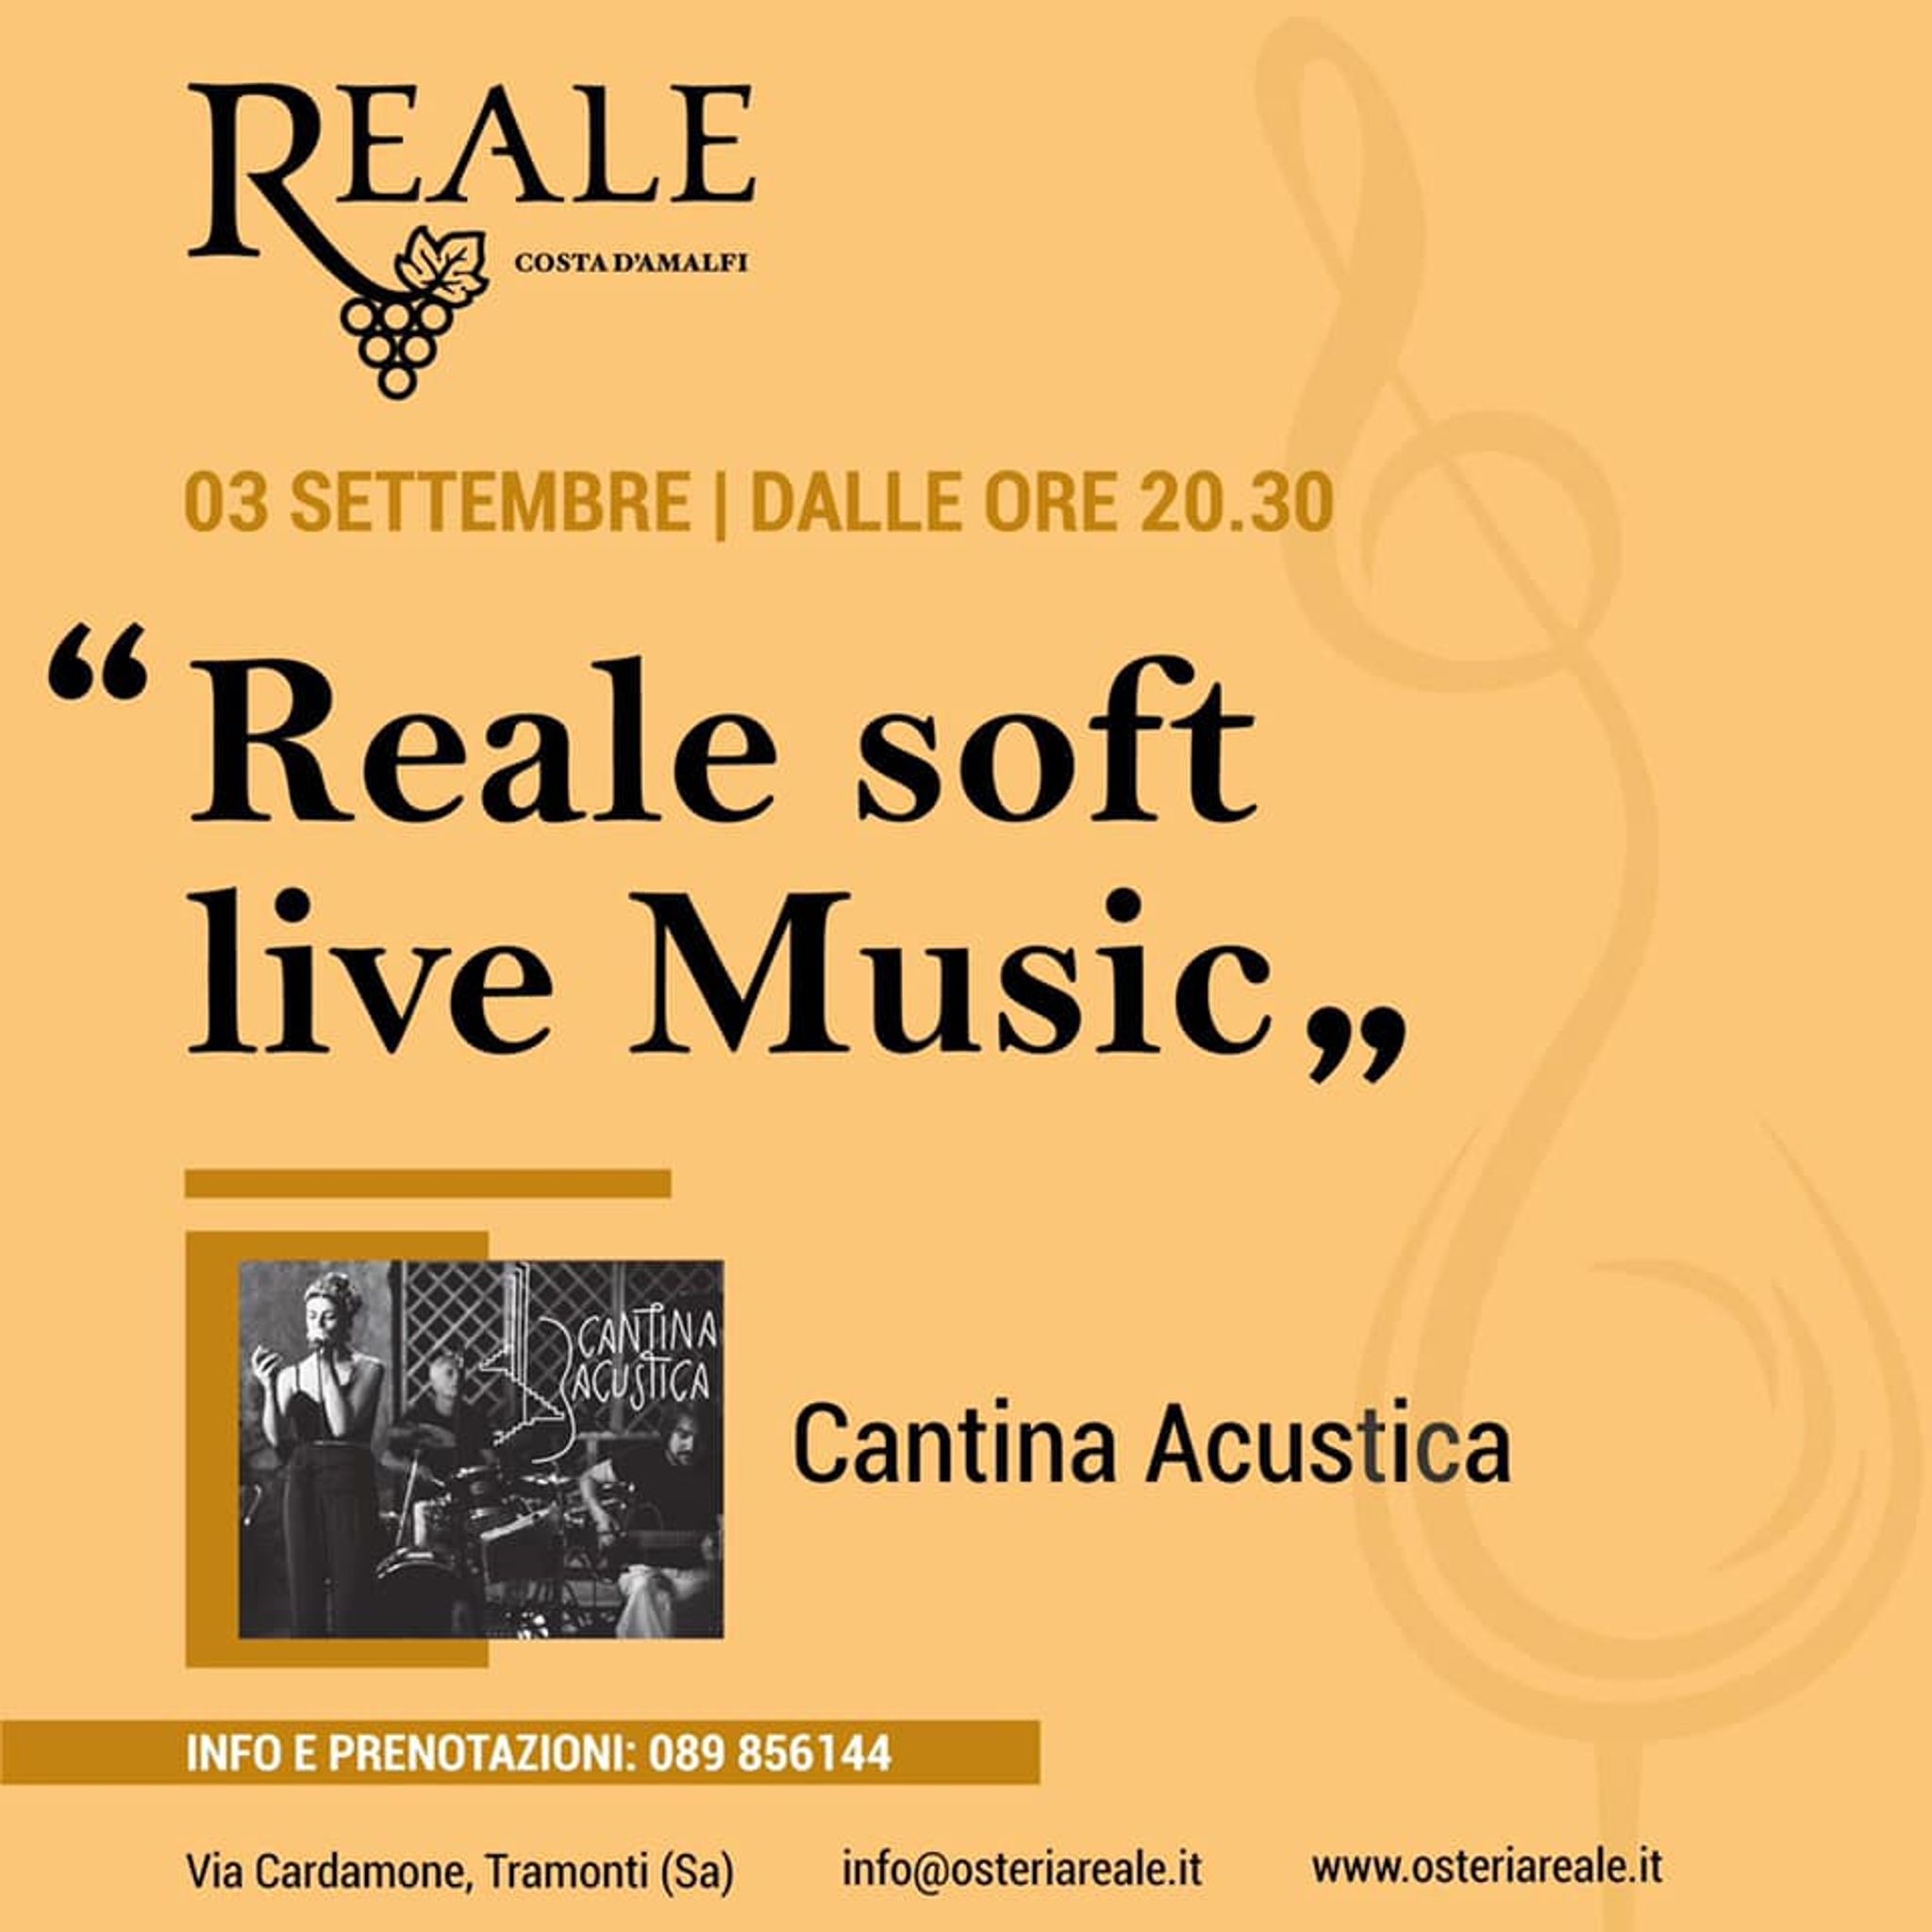 Reale soft live Music